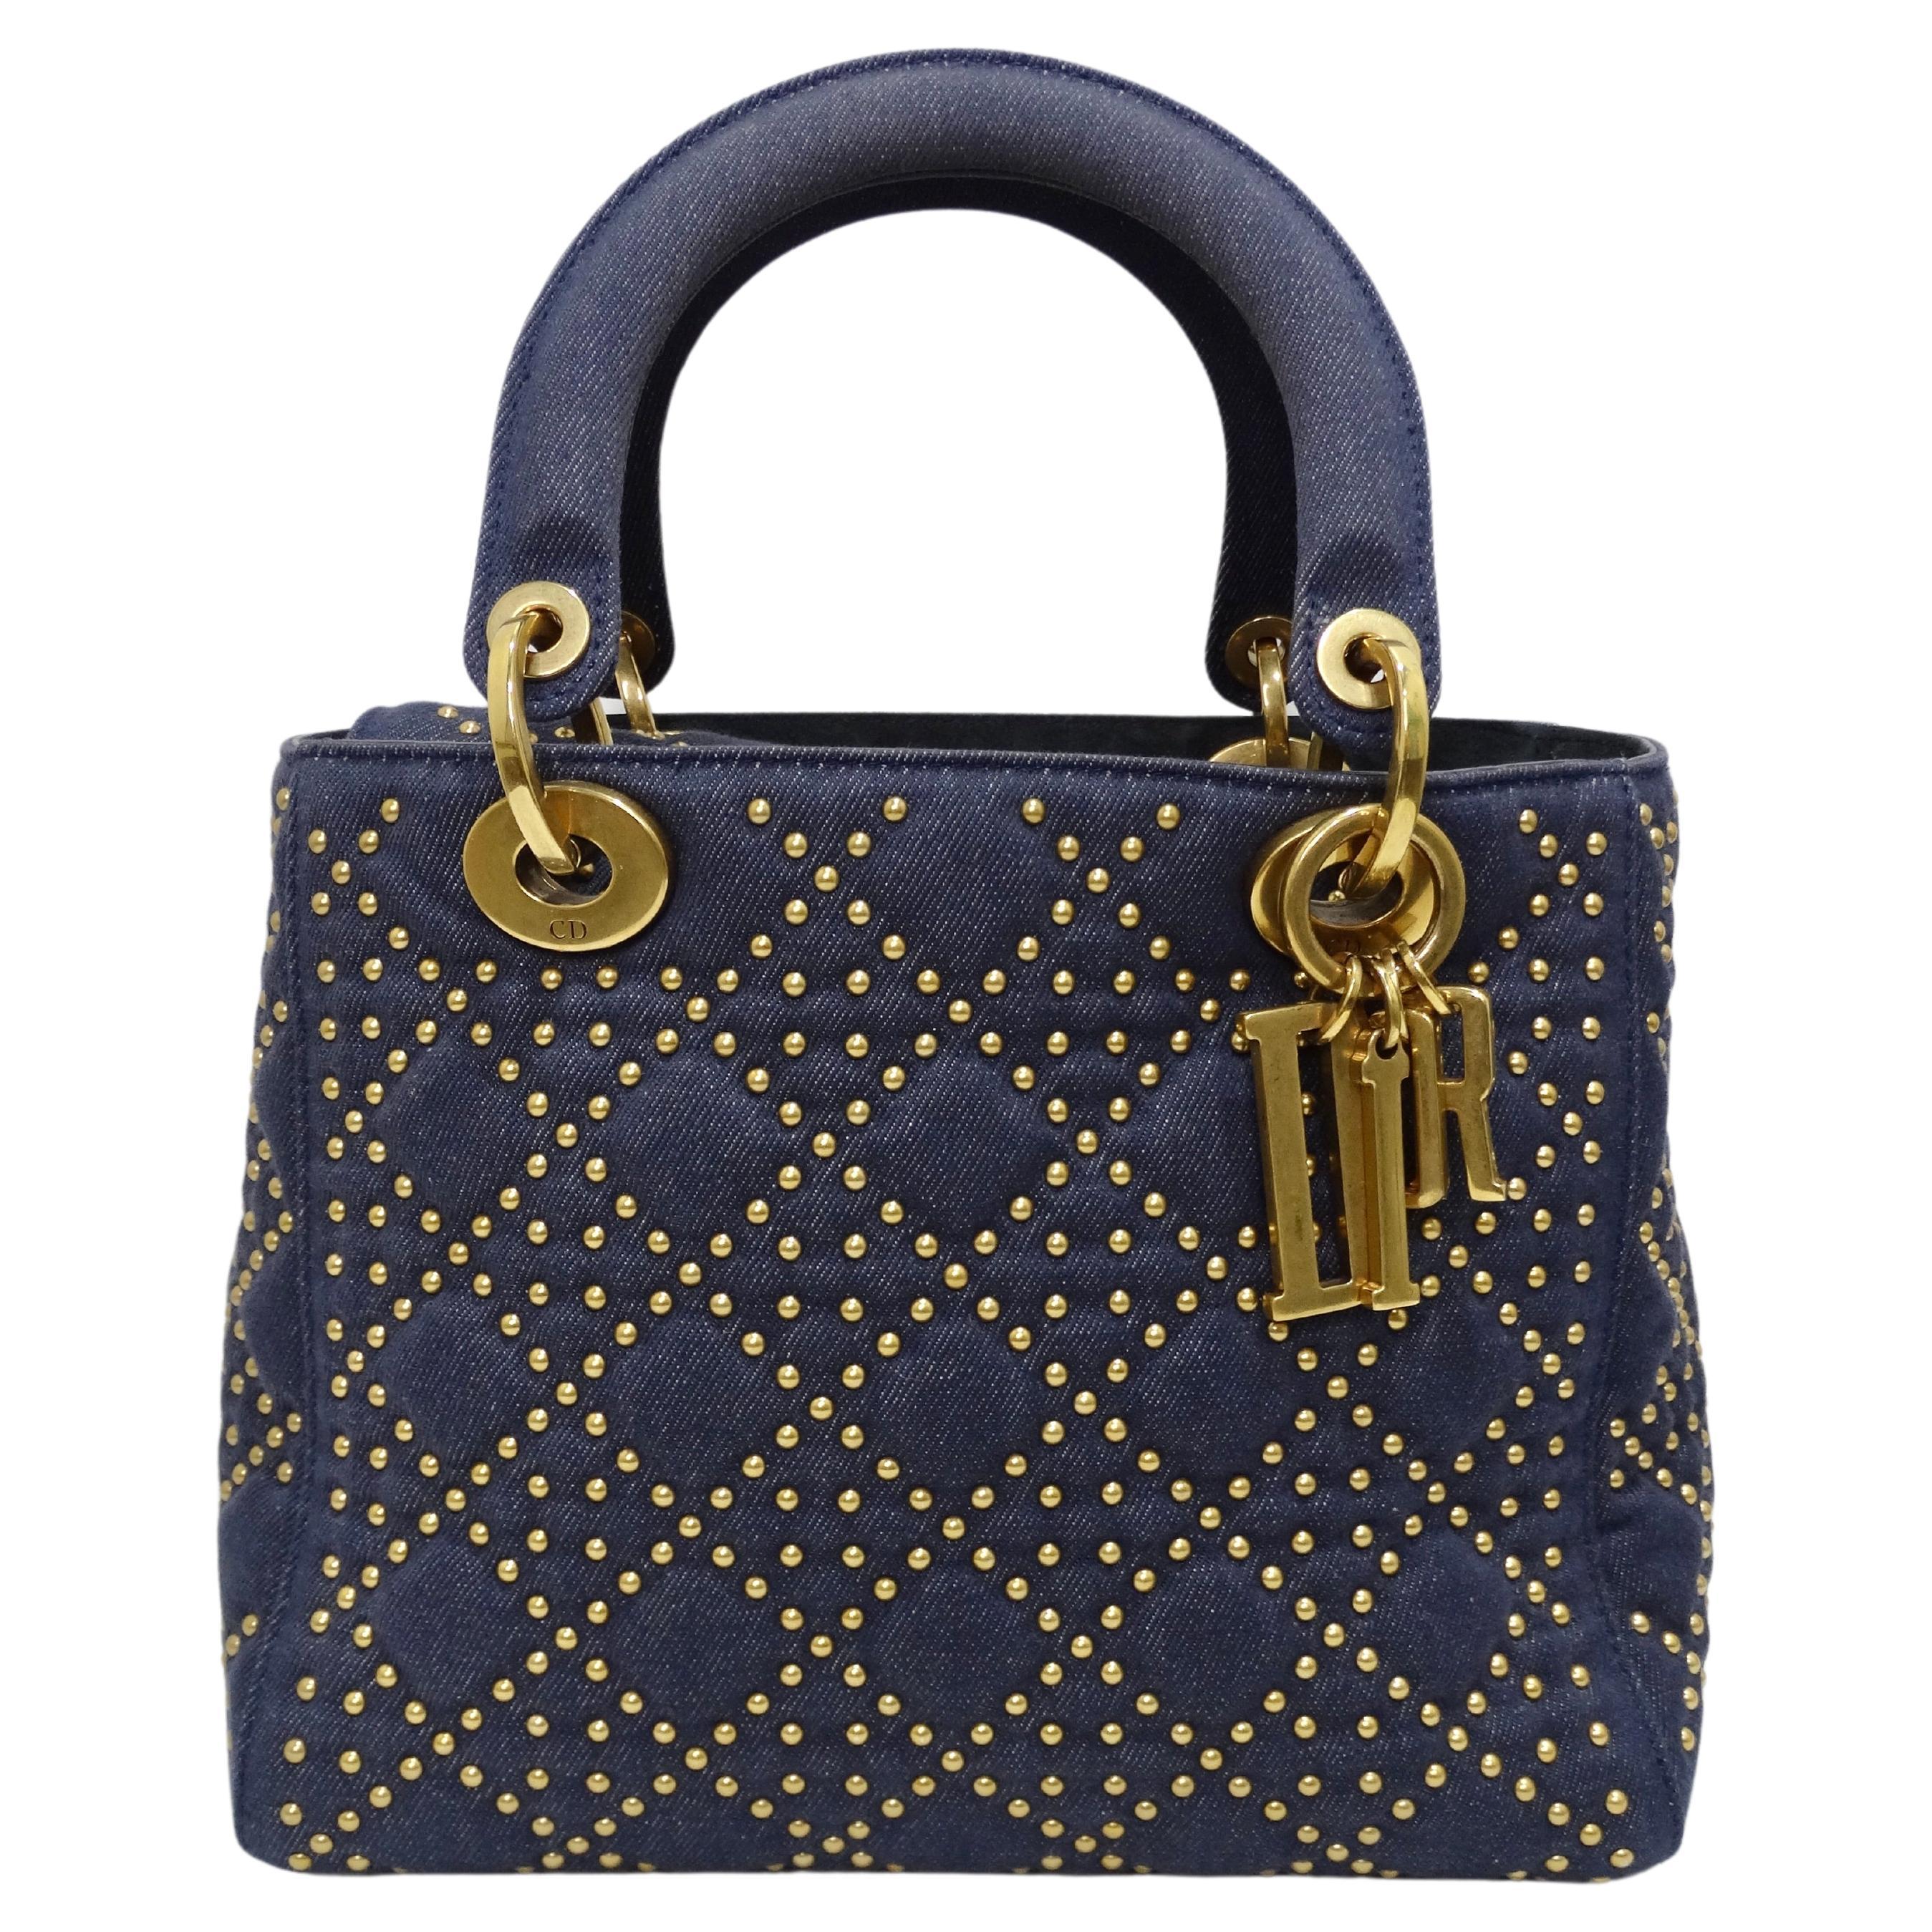 A Lady Dior in Denim! Proving once again that Dior is for the modern woman. Denim bags are so hot right now and I have got the perfect one for you! This bag is a medium size that can fit all your essentials. Carry this bag by the top handle or